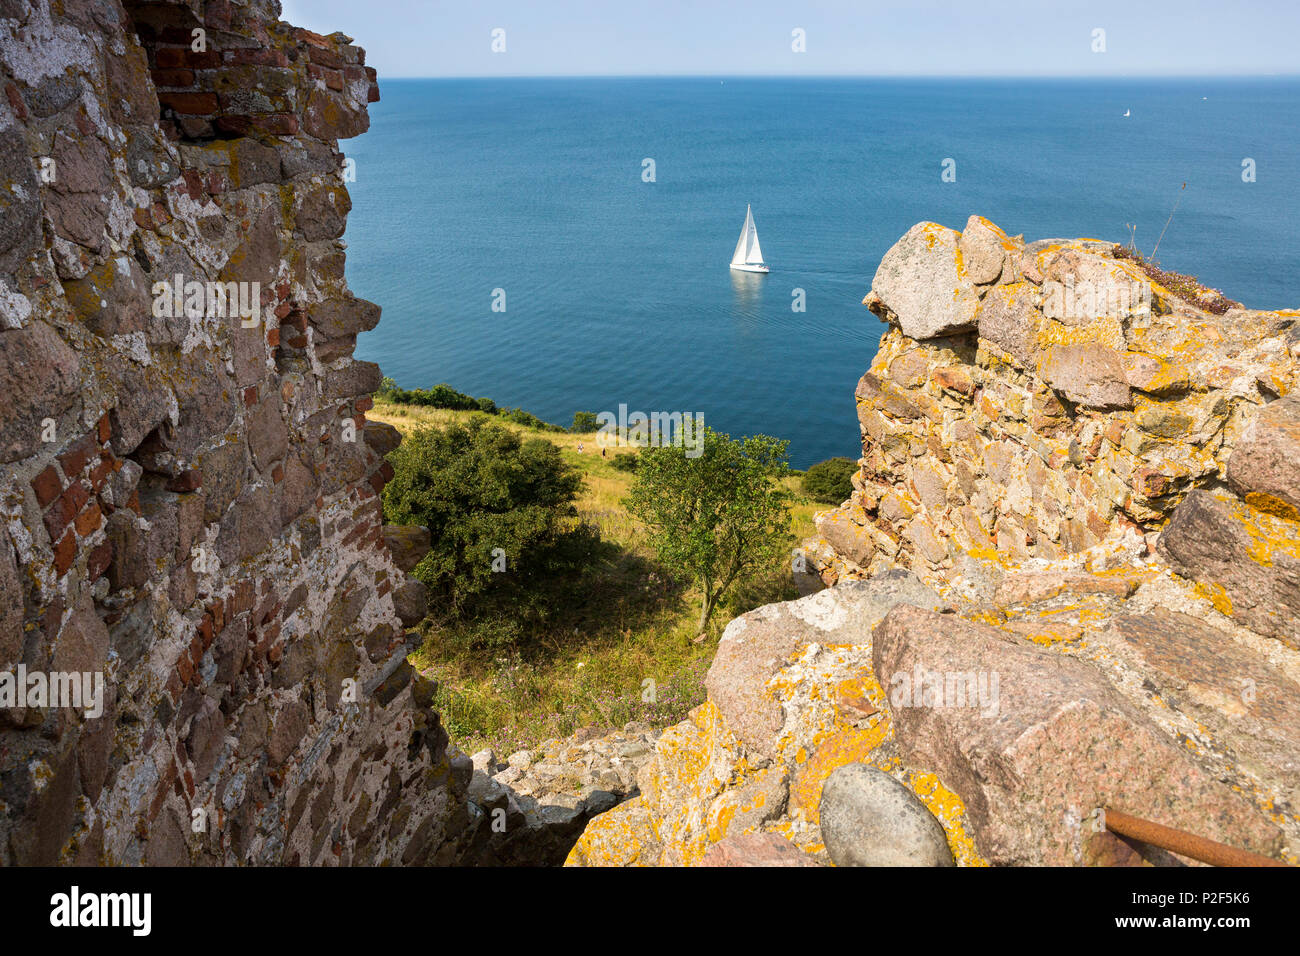 view from the castle ruins and medieval fortification, Hammershus, middle ages, Baltic sea, Bornholm, Denmark, Europe Stock Photo